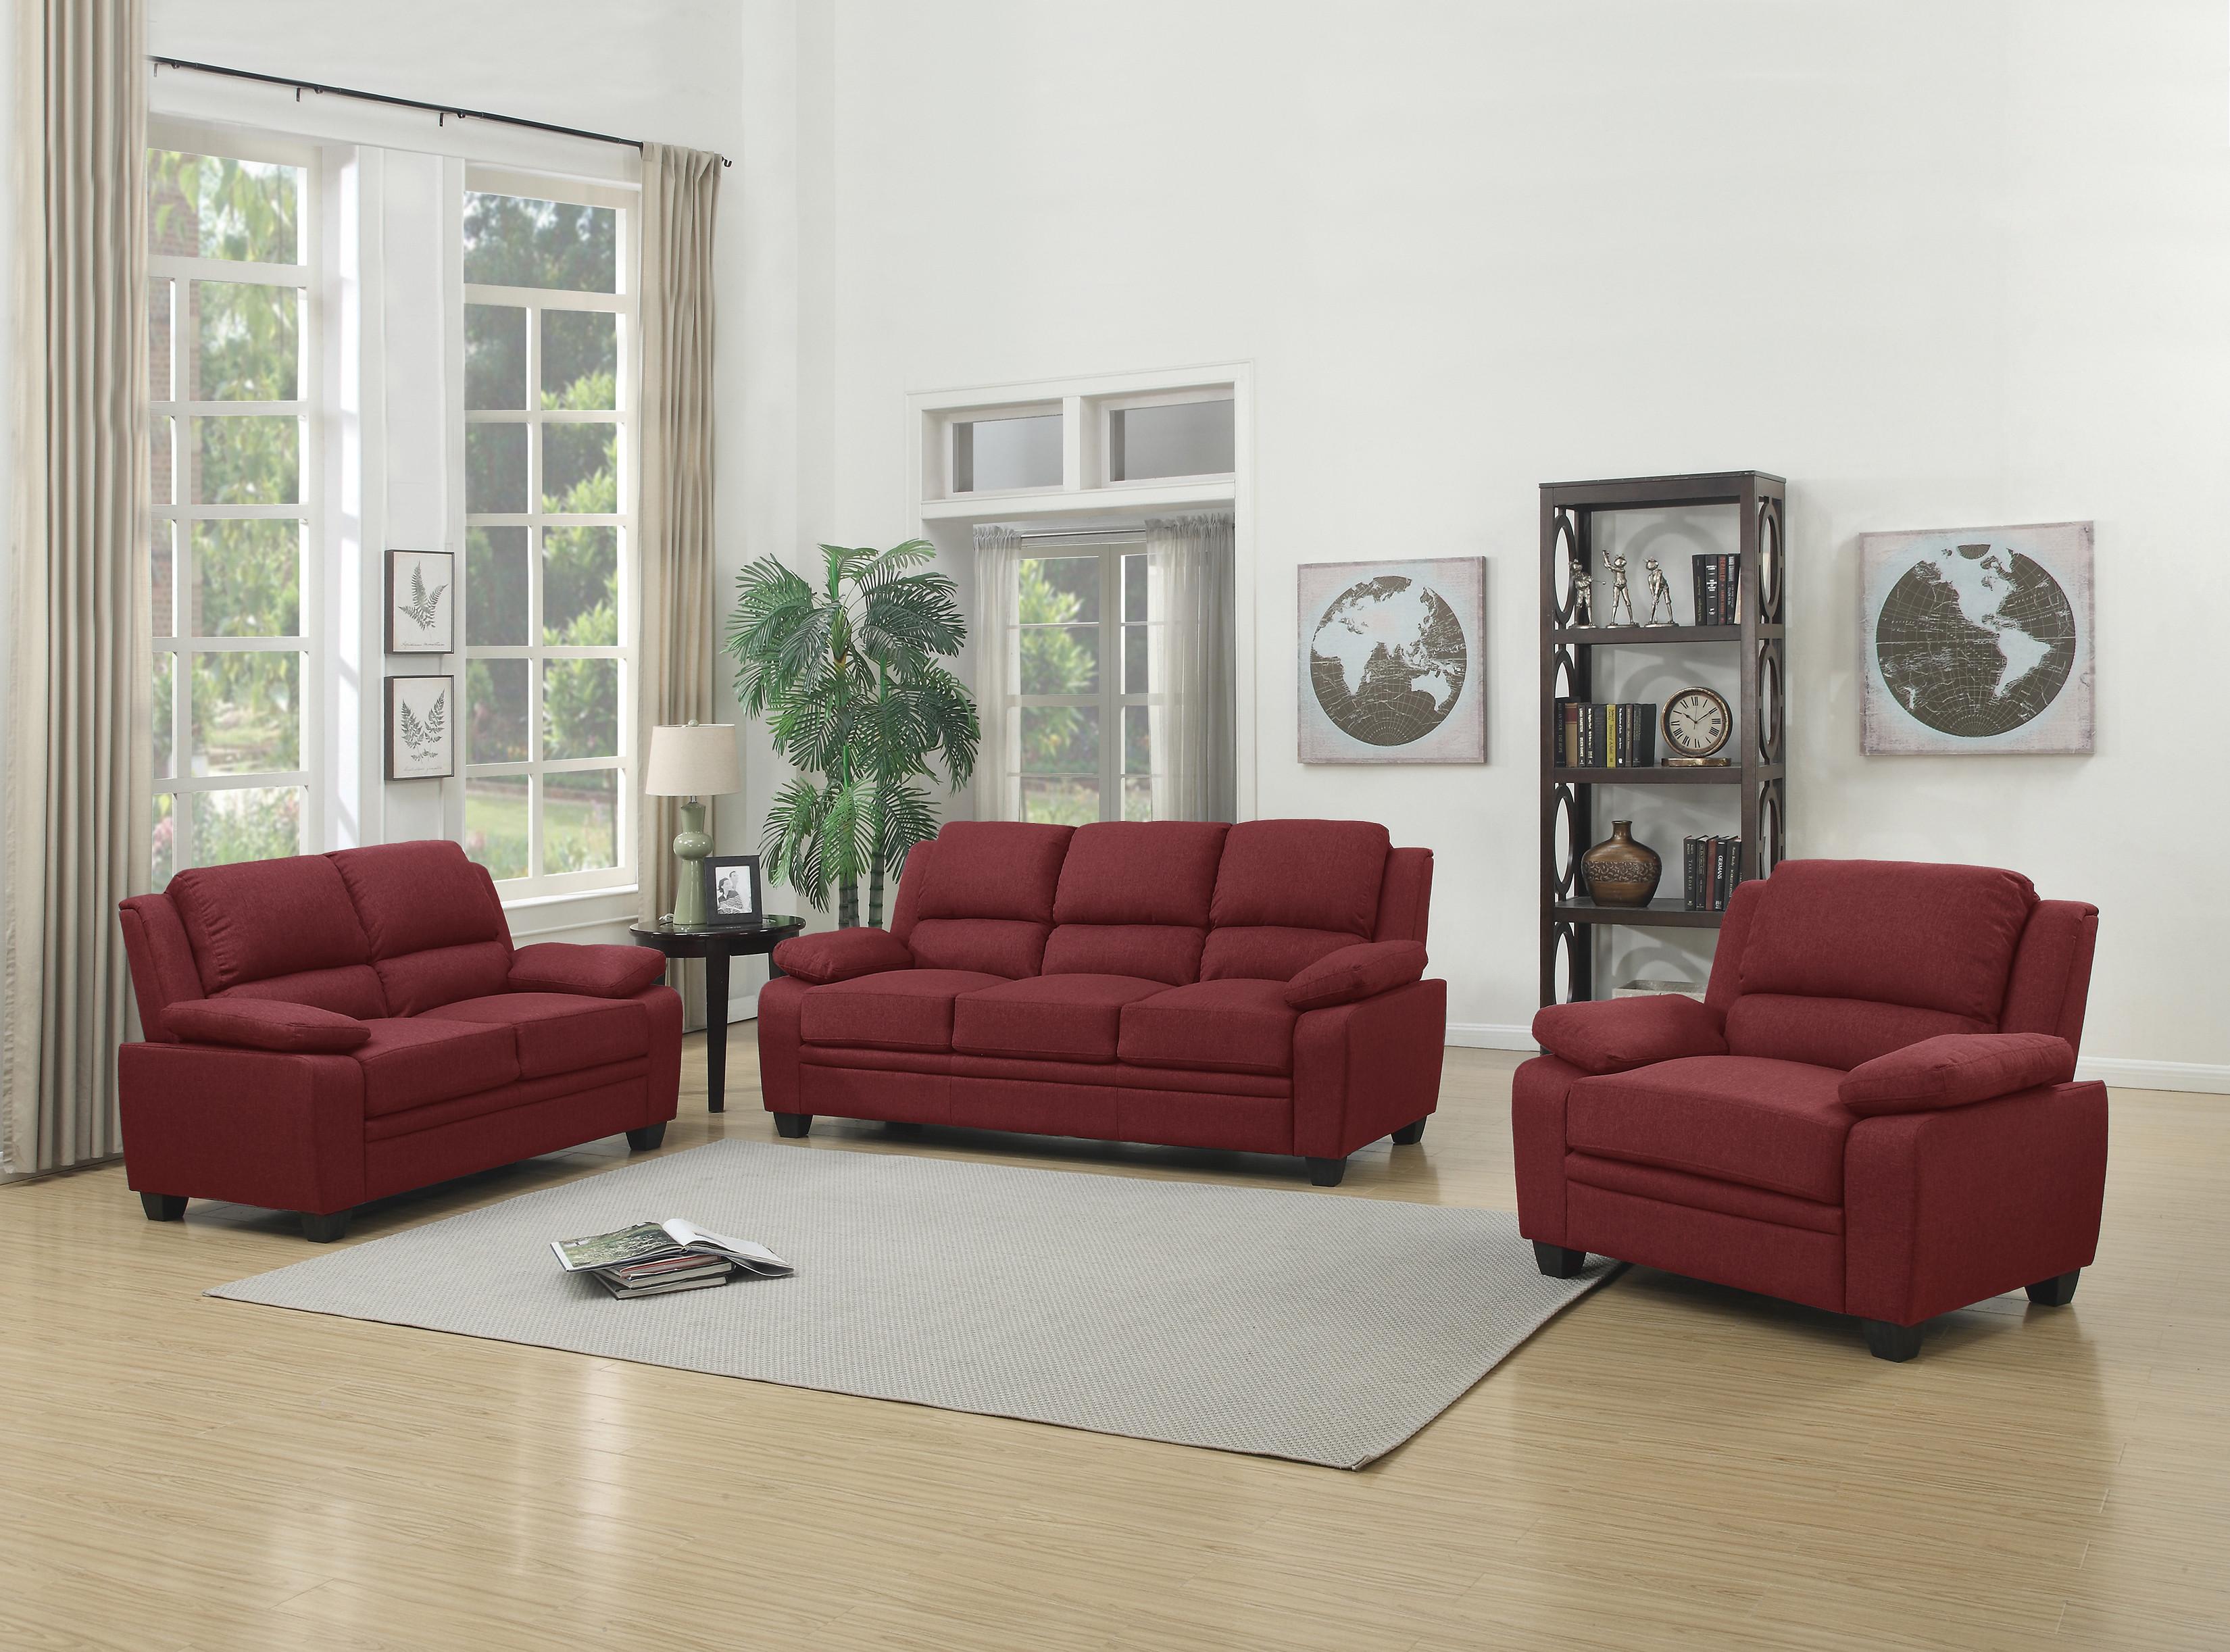 Lamme Udvidelse Lake Taupo Rent to Own Salo Merchandise 2 - Piece Darien Sofa and Loveseat - Red at  Aaron's today!